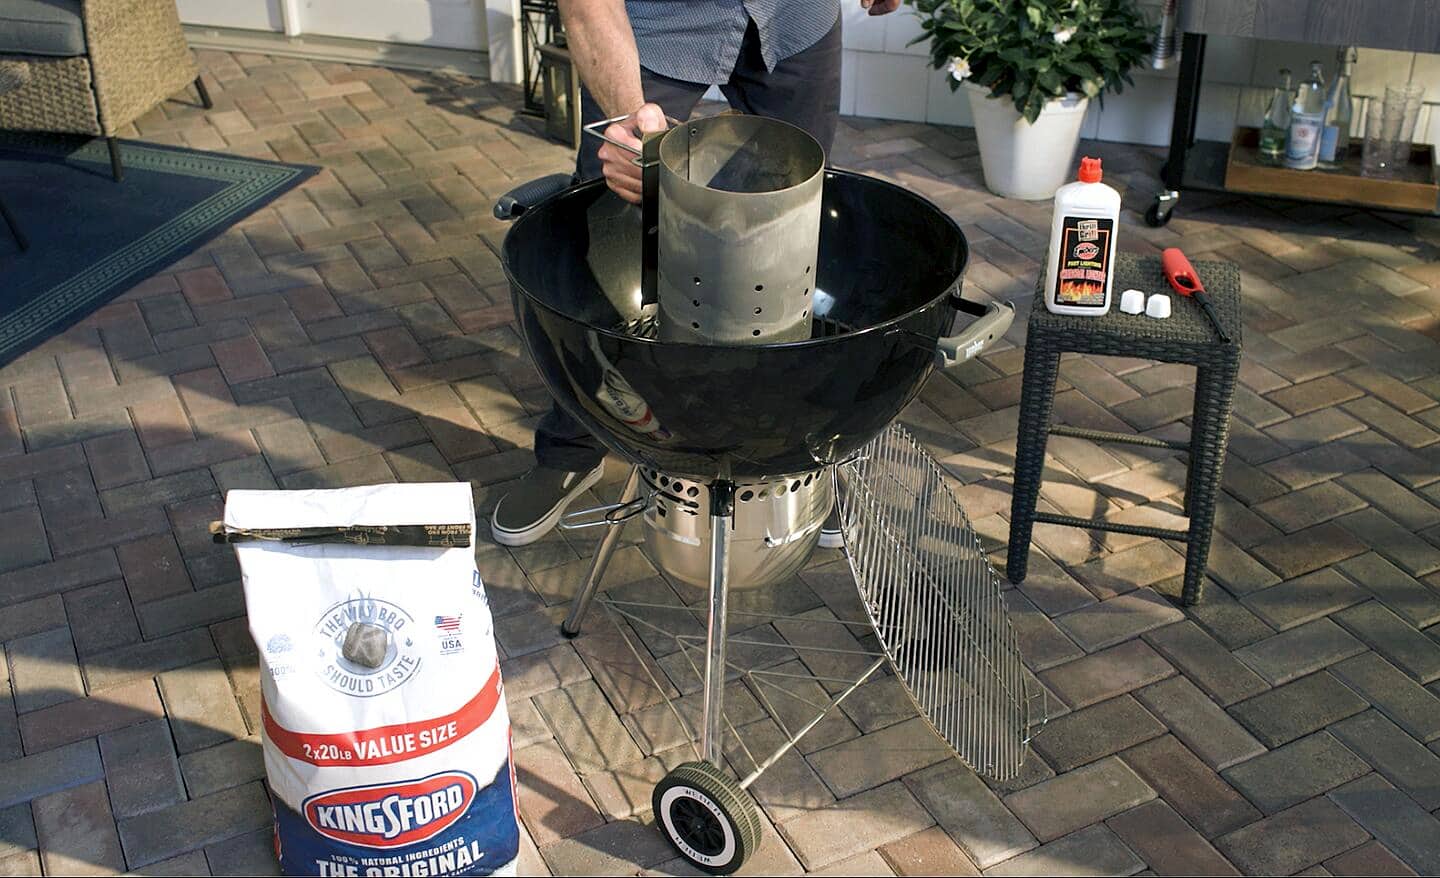 How to Use a Charcoal Grill: Your Guide to Prep, Cooking and Storage